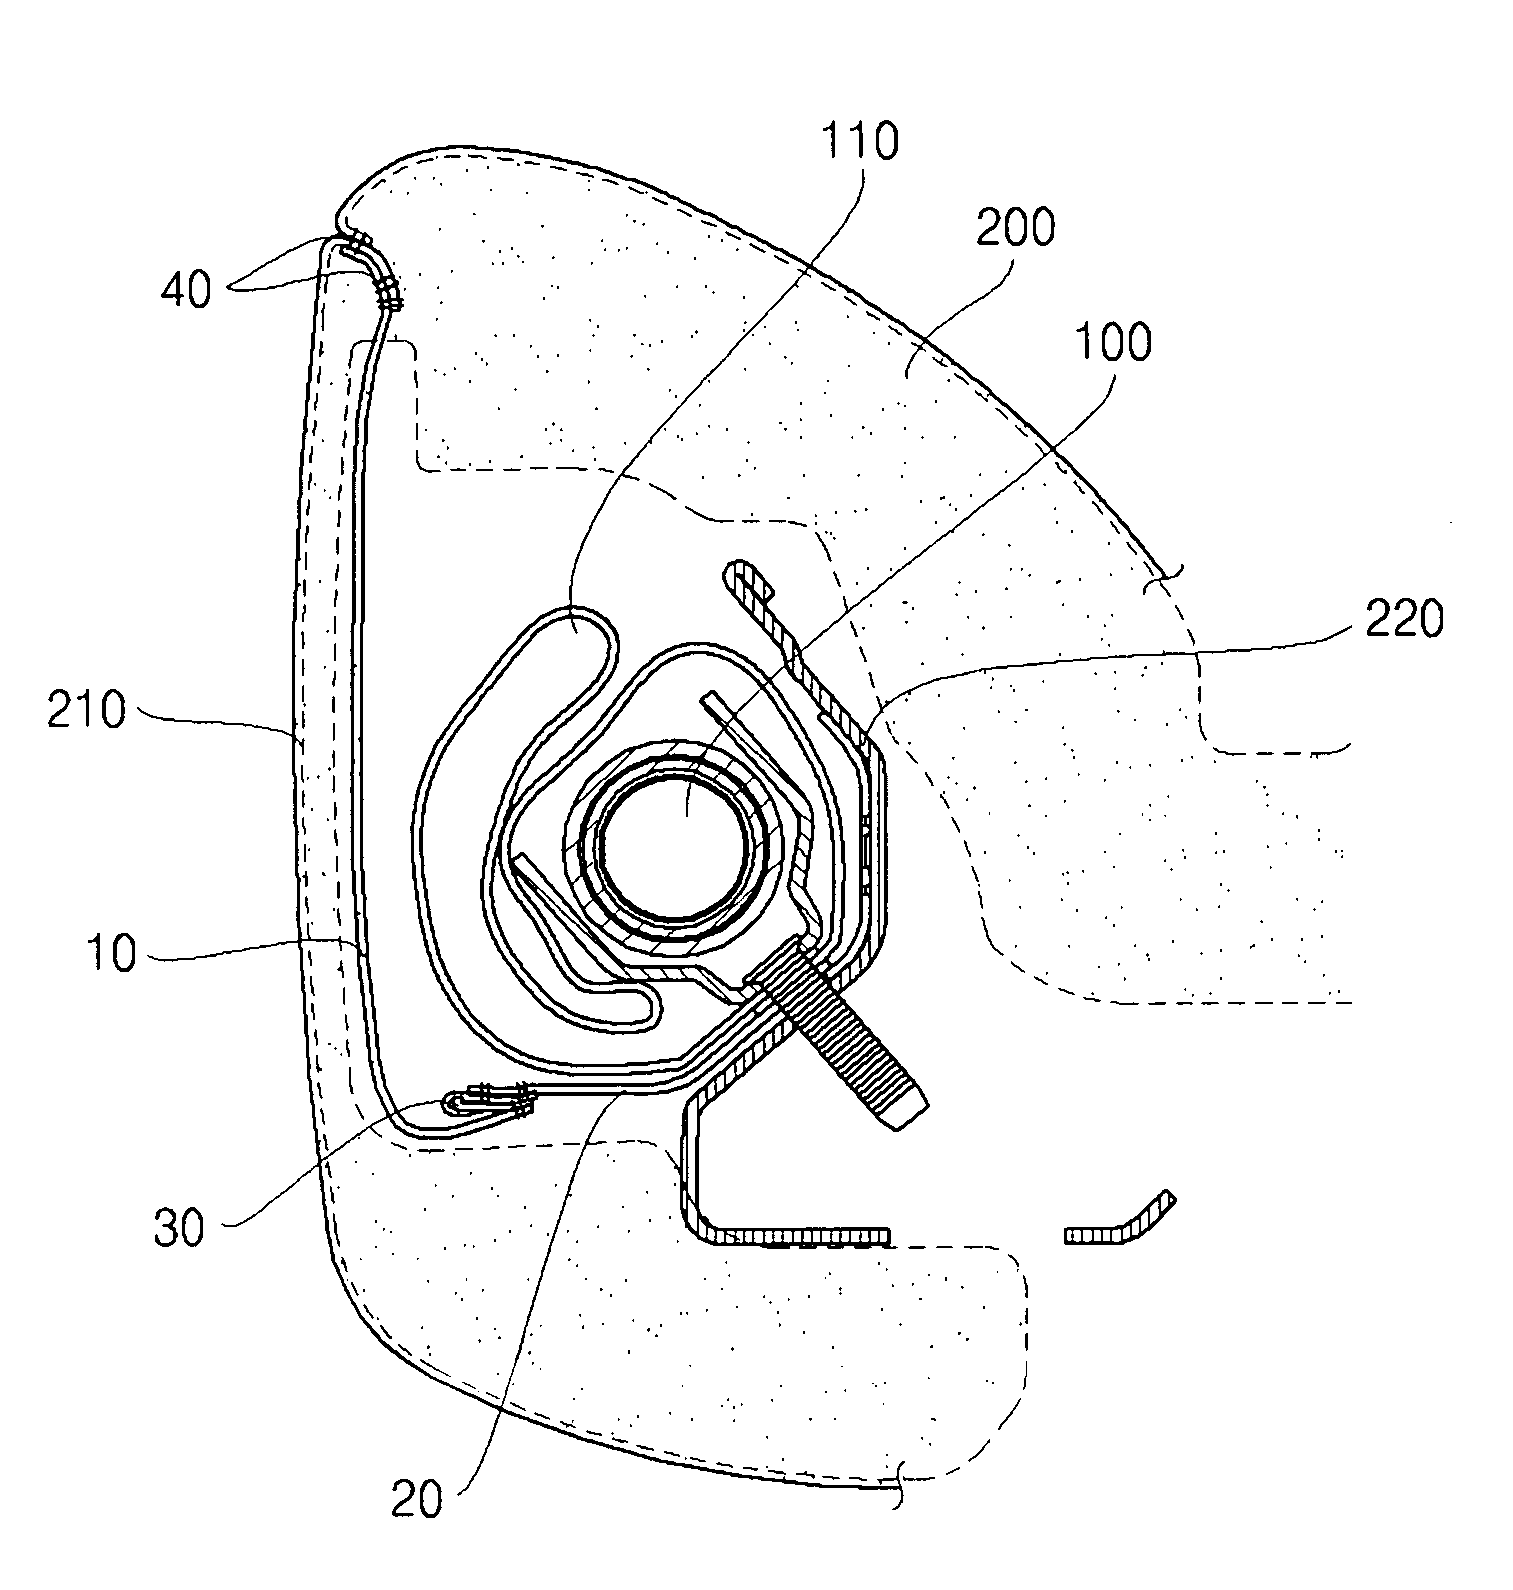 Structure for guiding deploy of side airbag for seat of vehicle